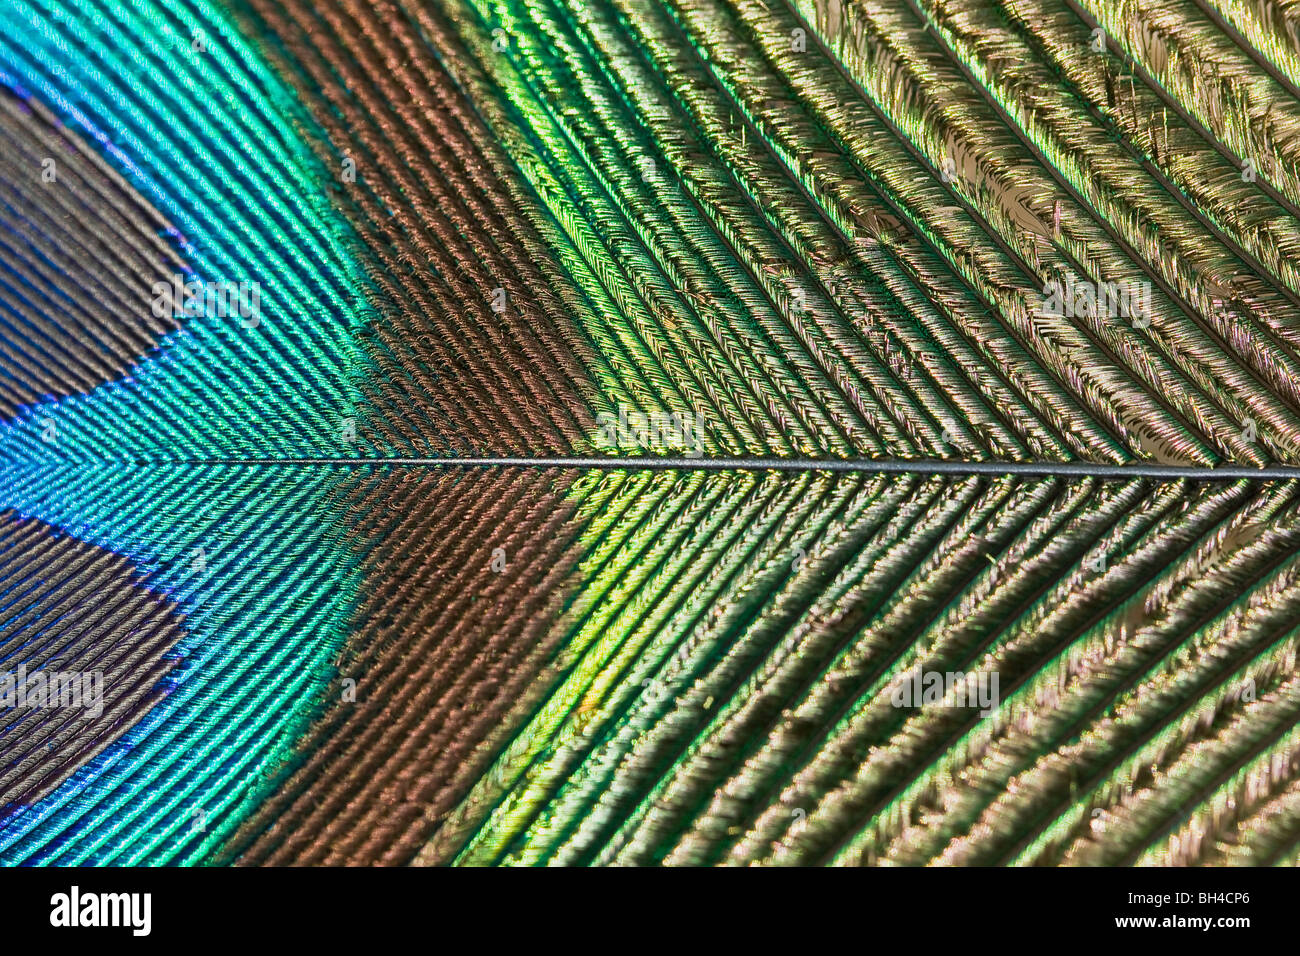 A blue, green and gold coloured peacock feather. Stock Photo